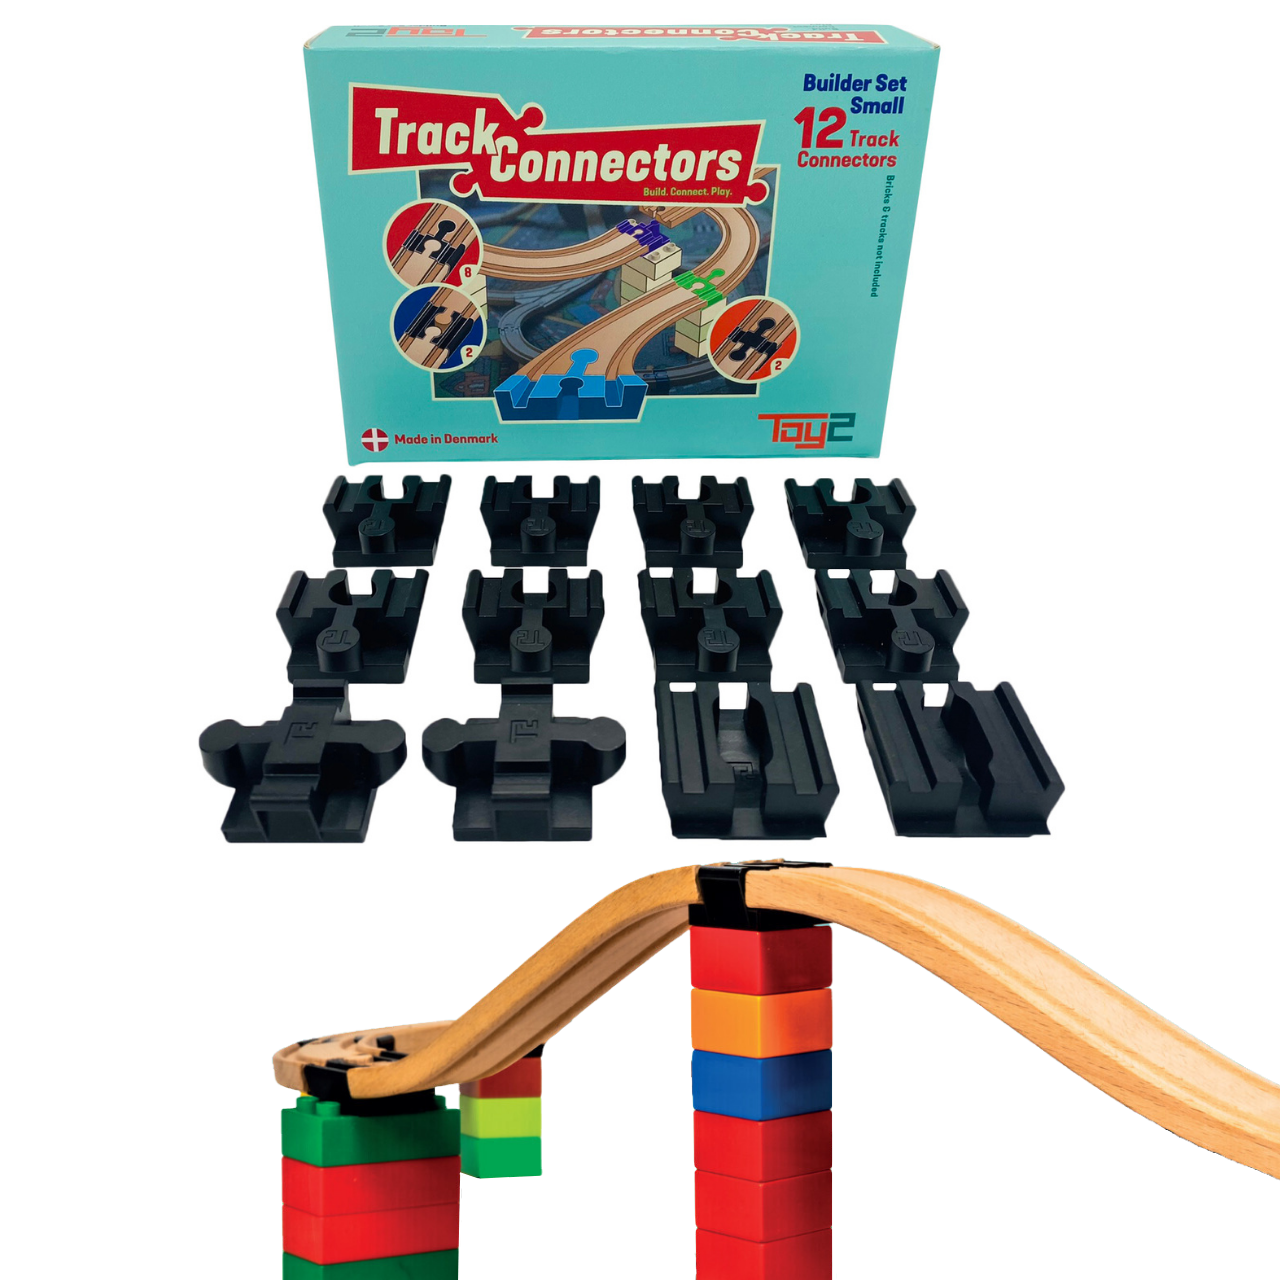 Track Connector - Builder Set - Small (21001)